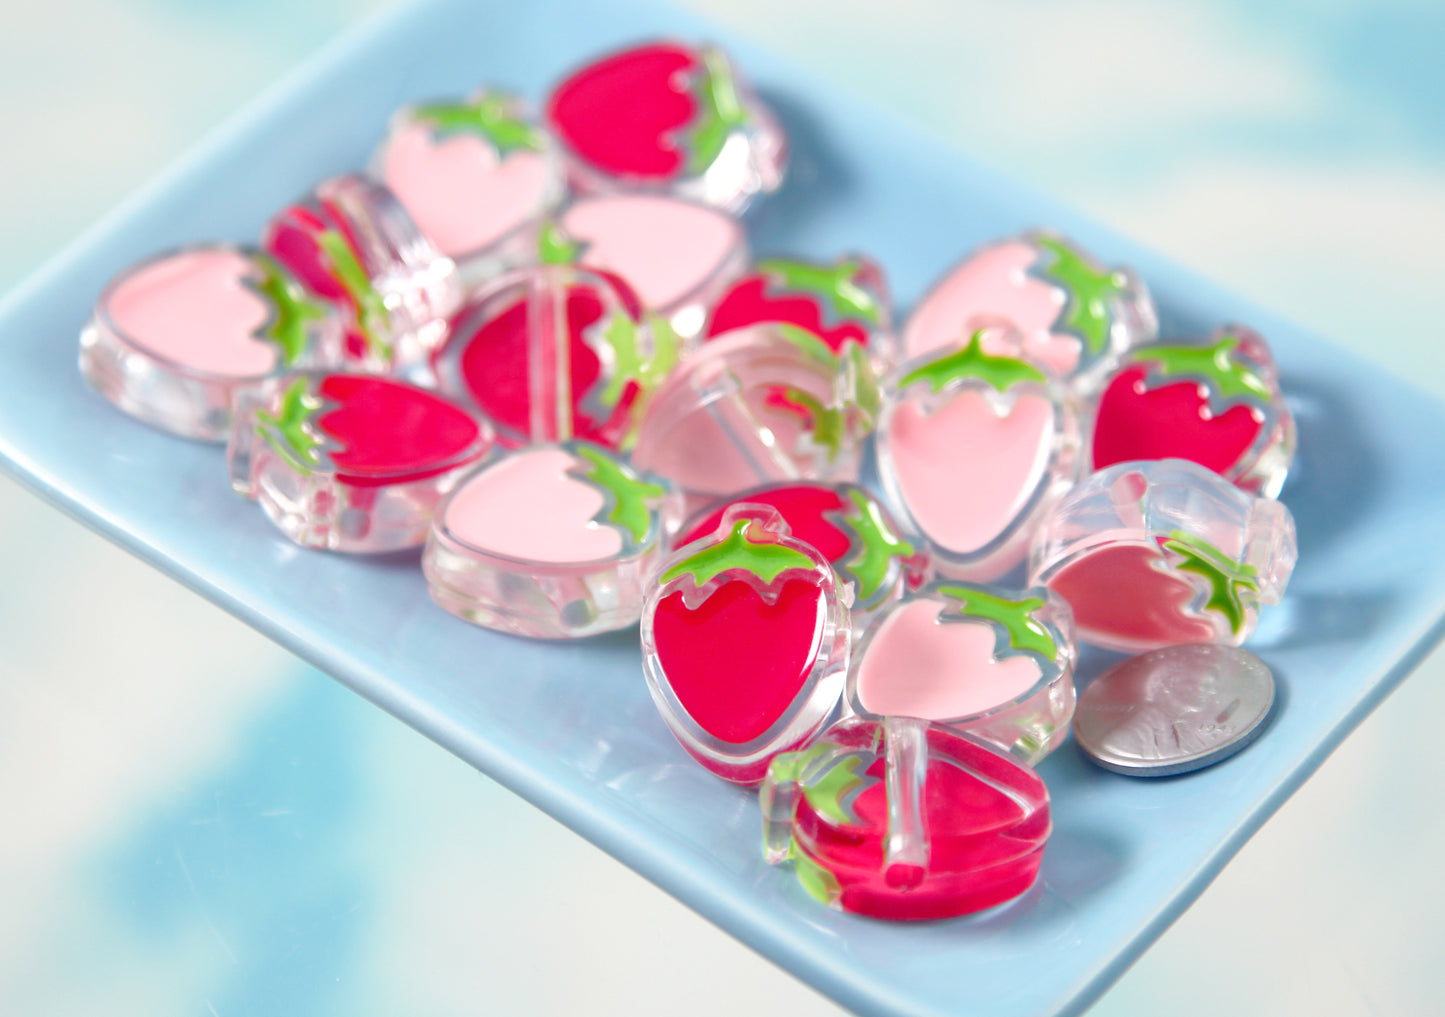 Strawberry Beads - 26mm Strawberry Transparent Acrylic or Resin Beads - 8 pc set